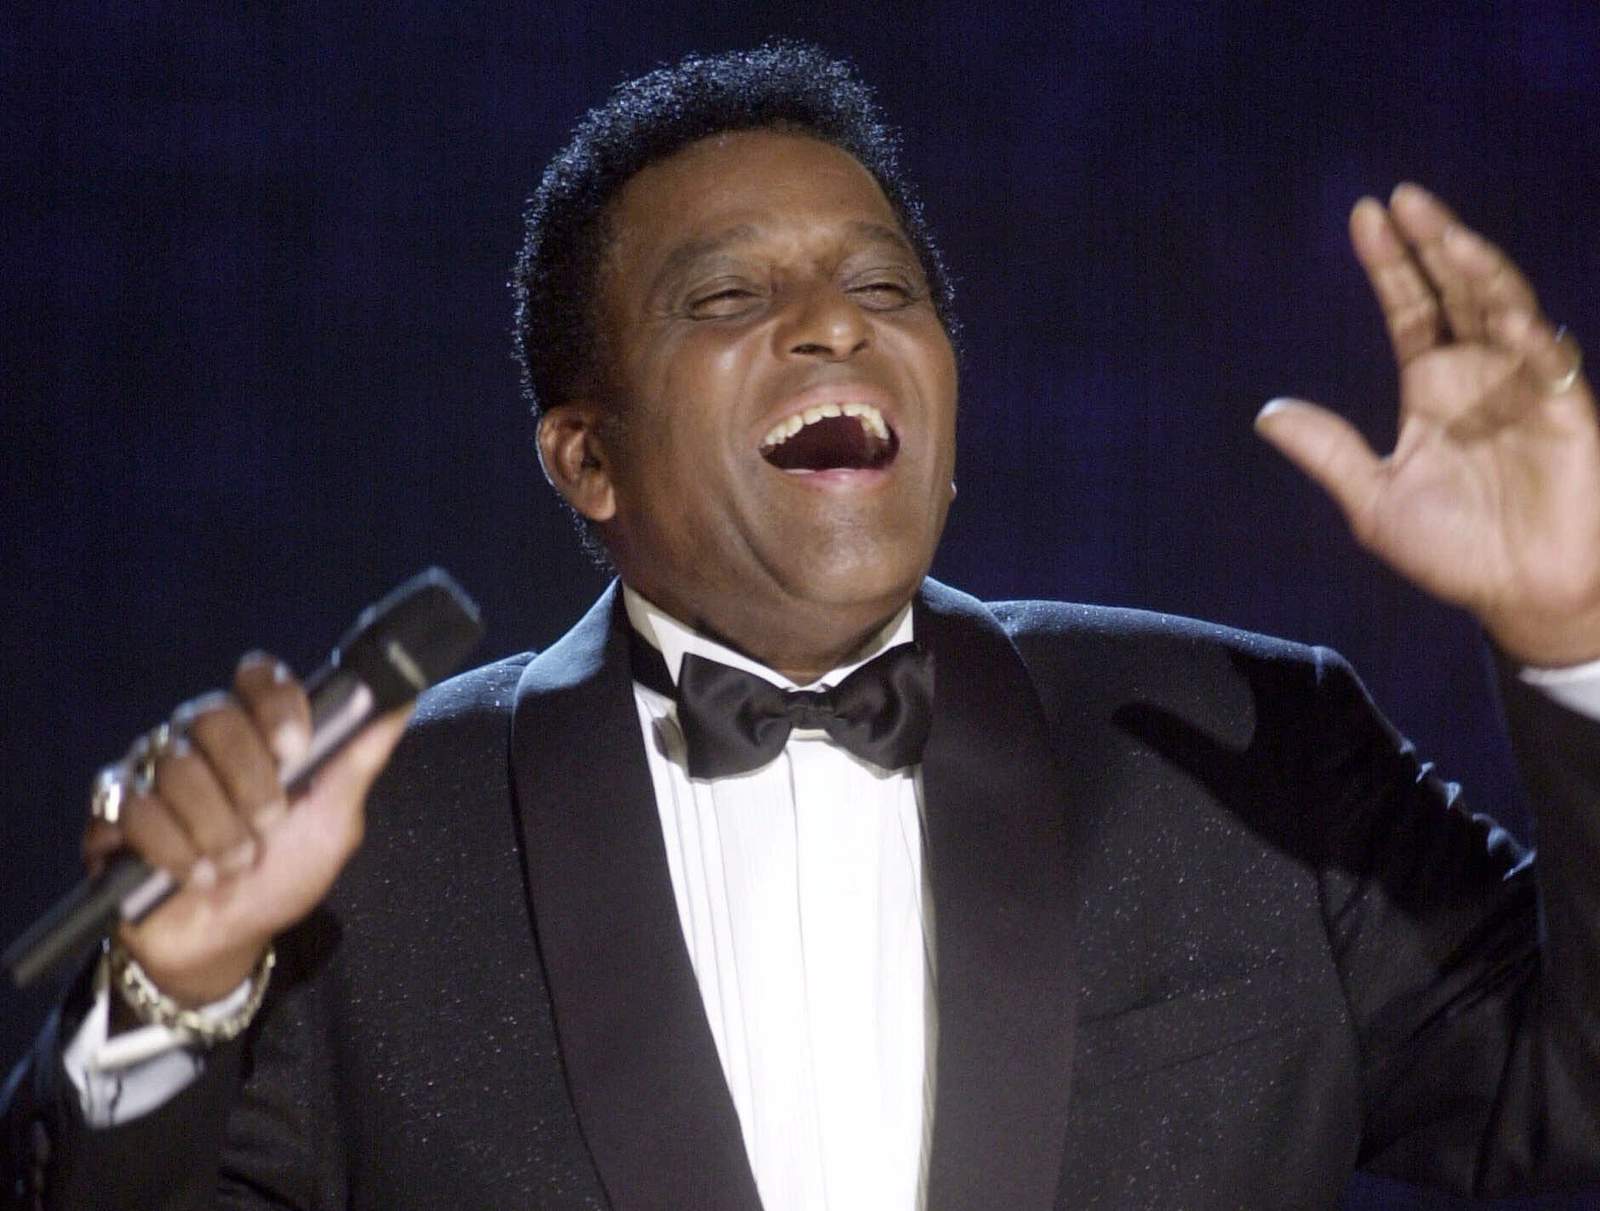 Charley Pride overcame racial barriers as country music star